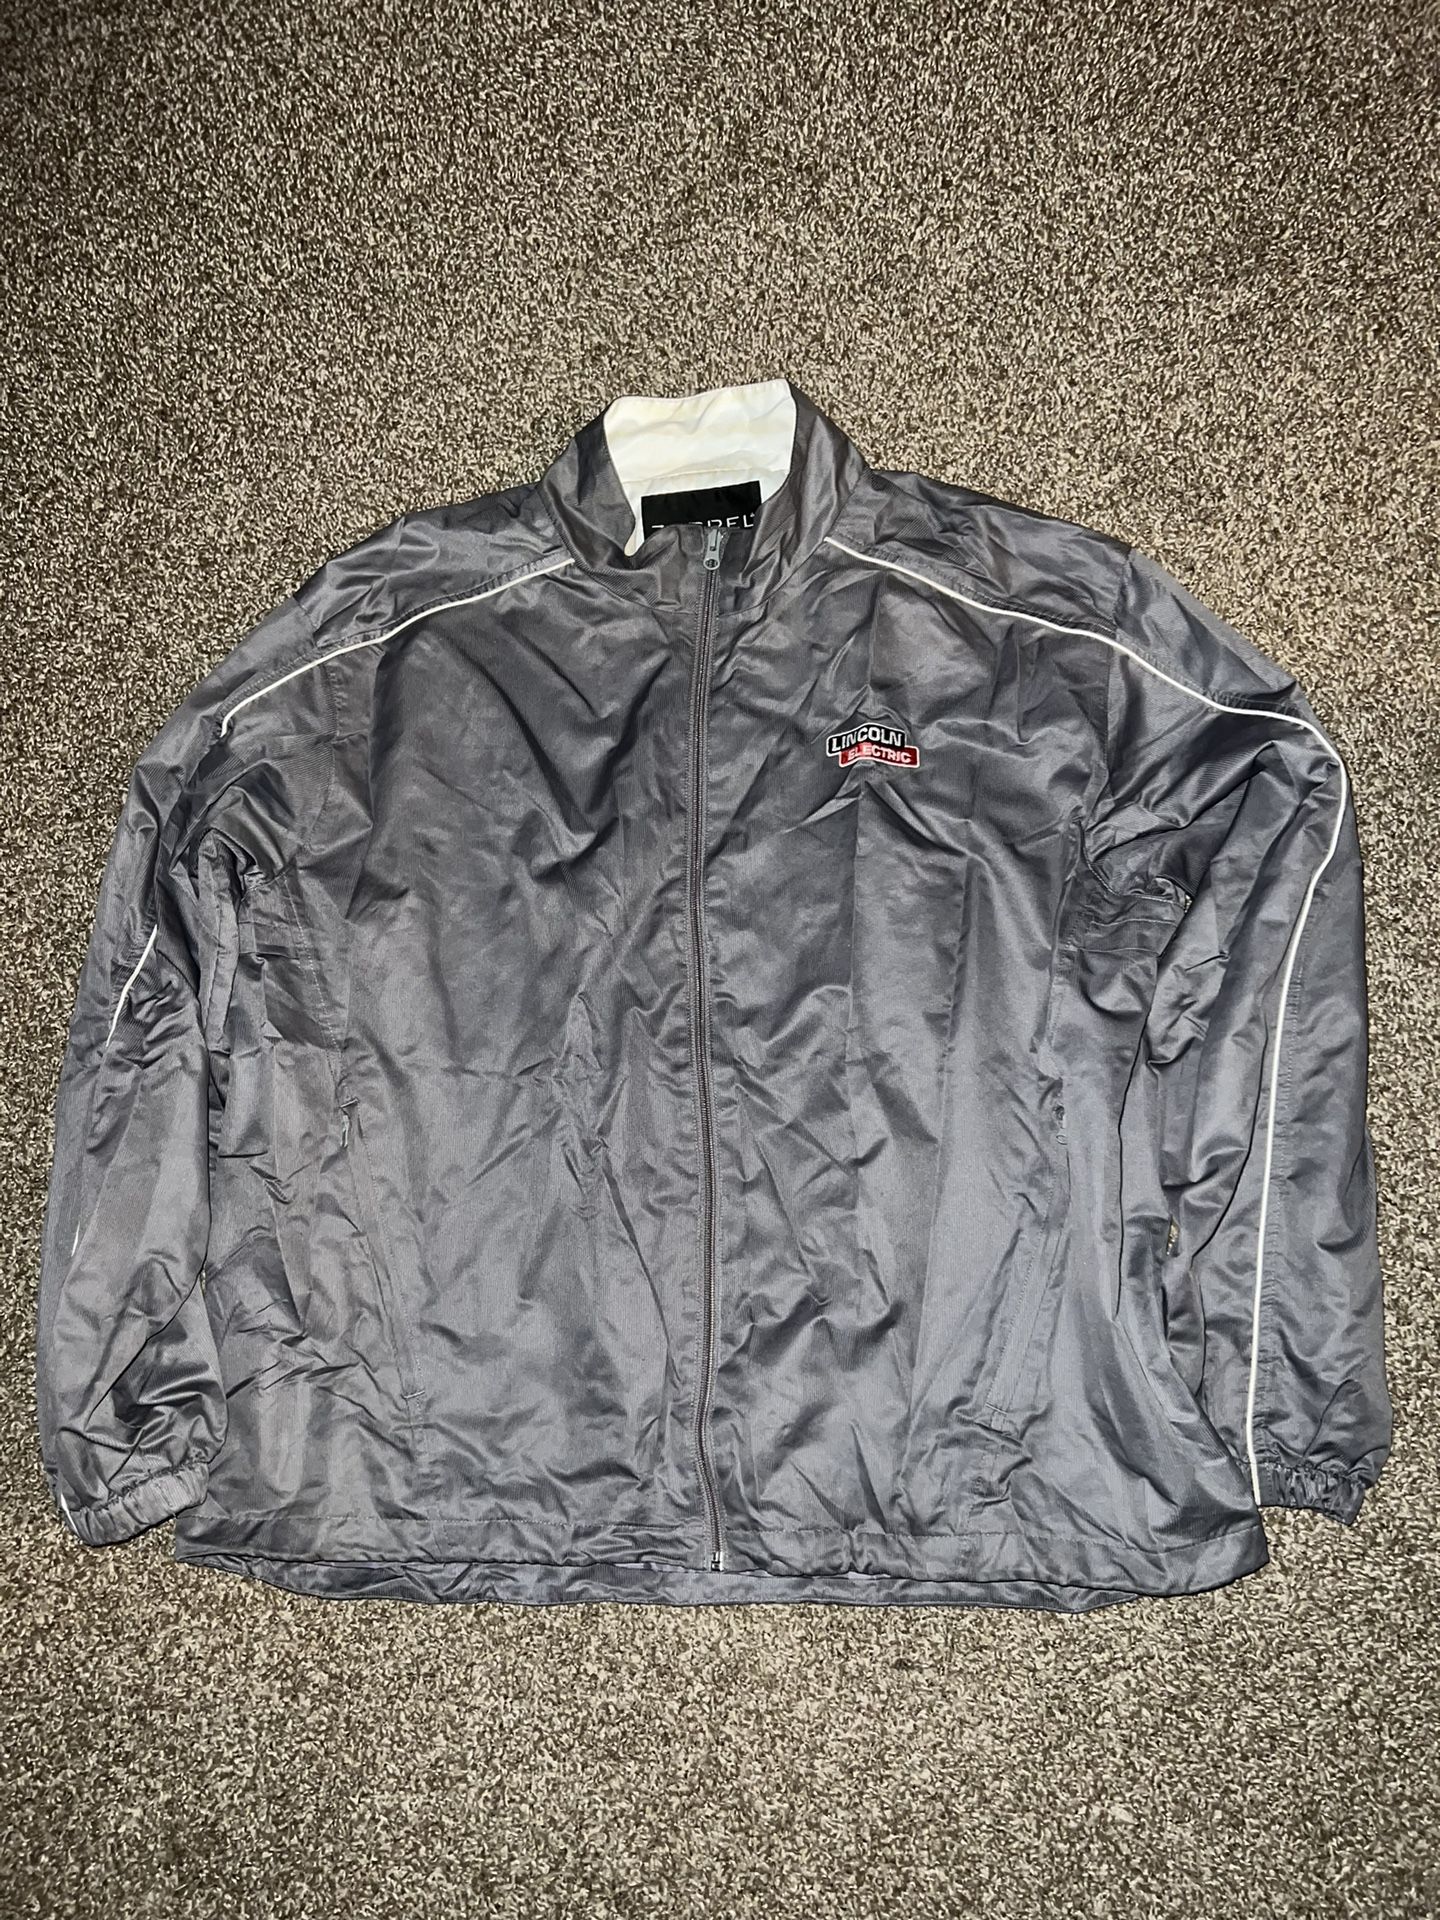 Zorrel Lincoln Electric Jacket